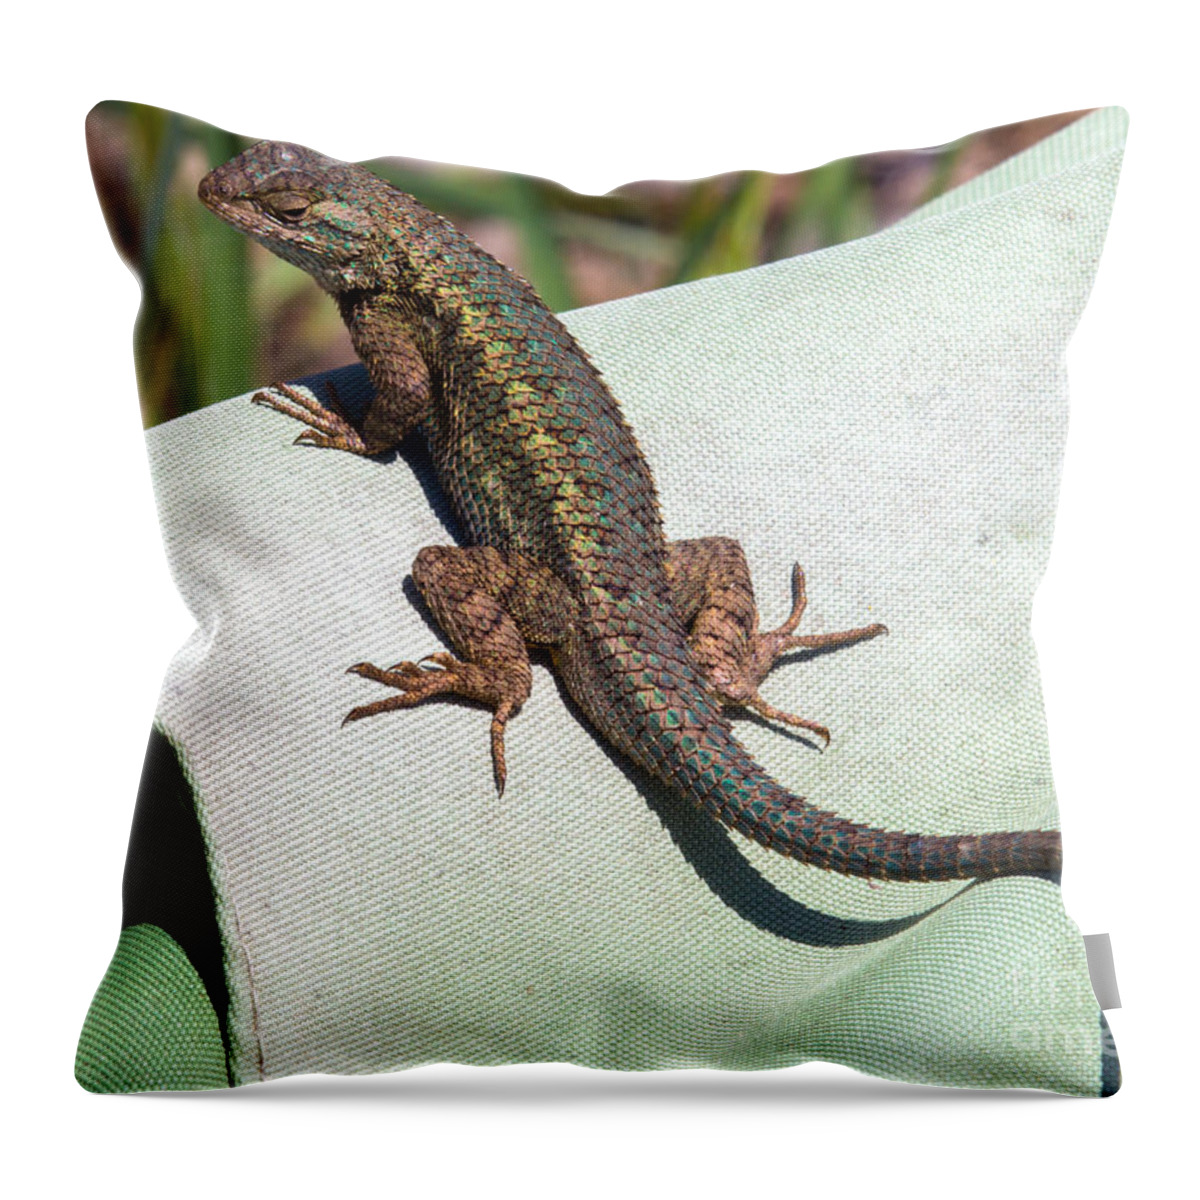 Lizard Throw Pillow featuring the photograph Up on High by Shawn Jeffries